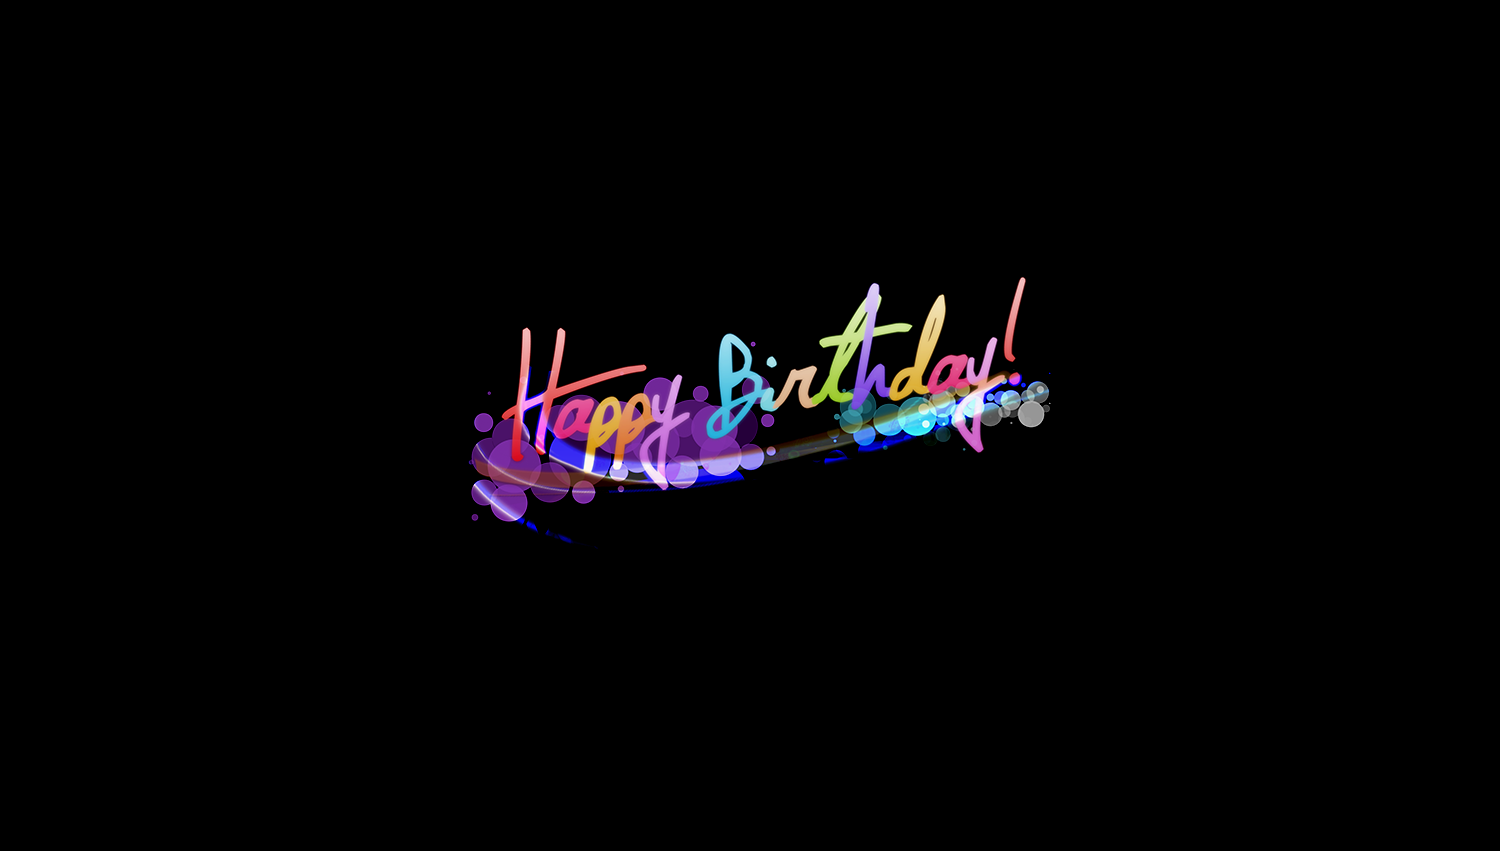 Happy Birthday Wallpapers Download High Definition 1500x851